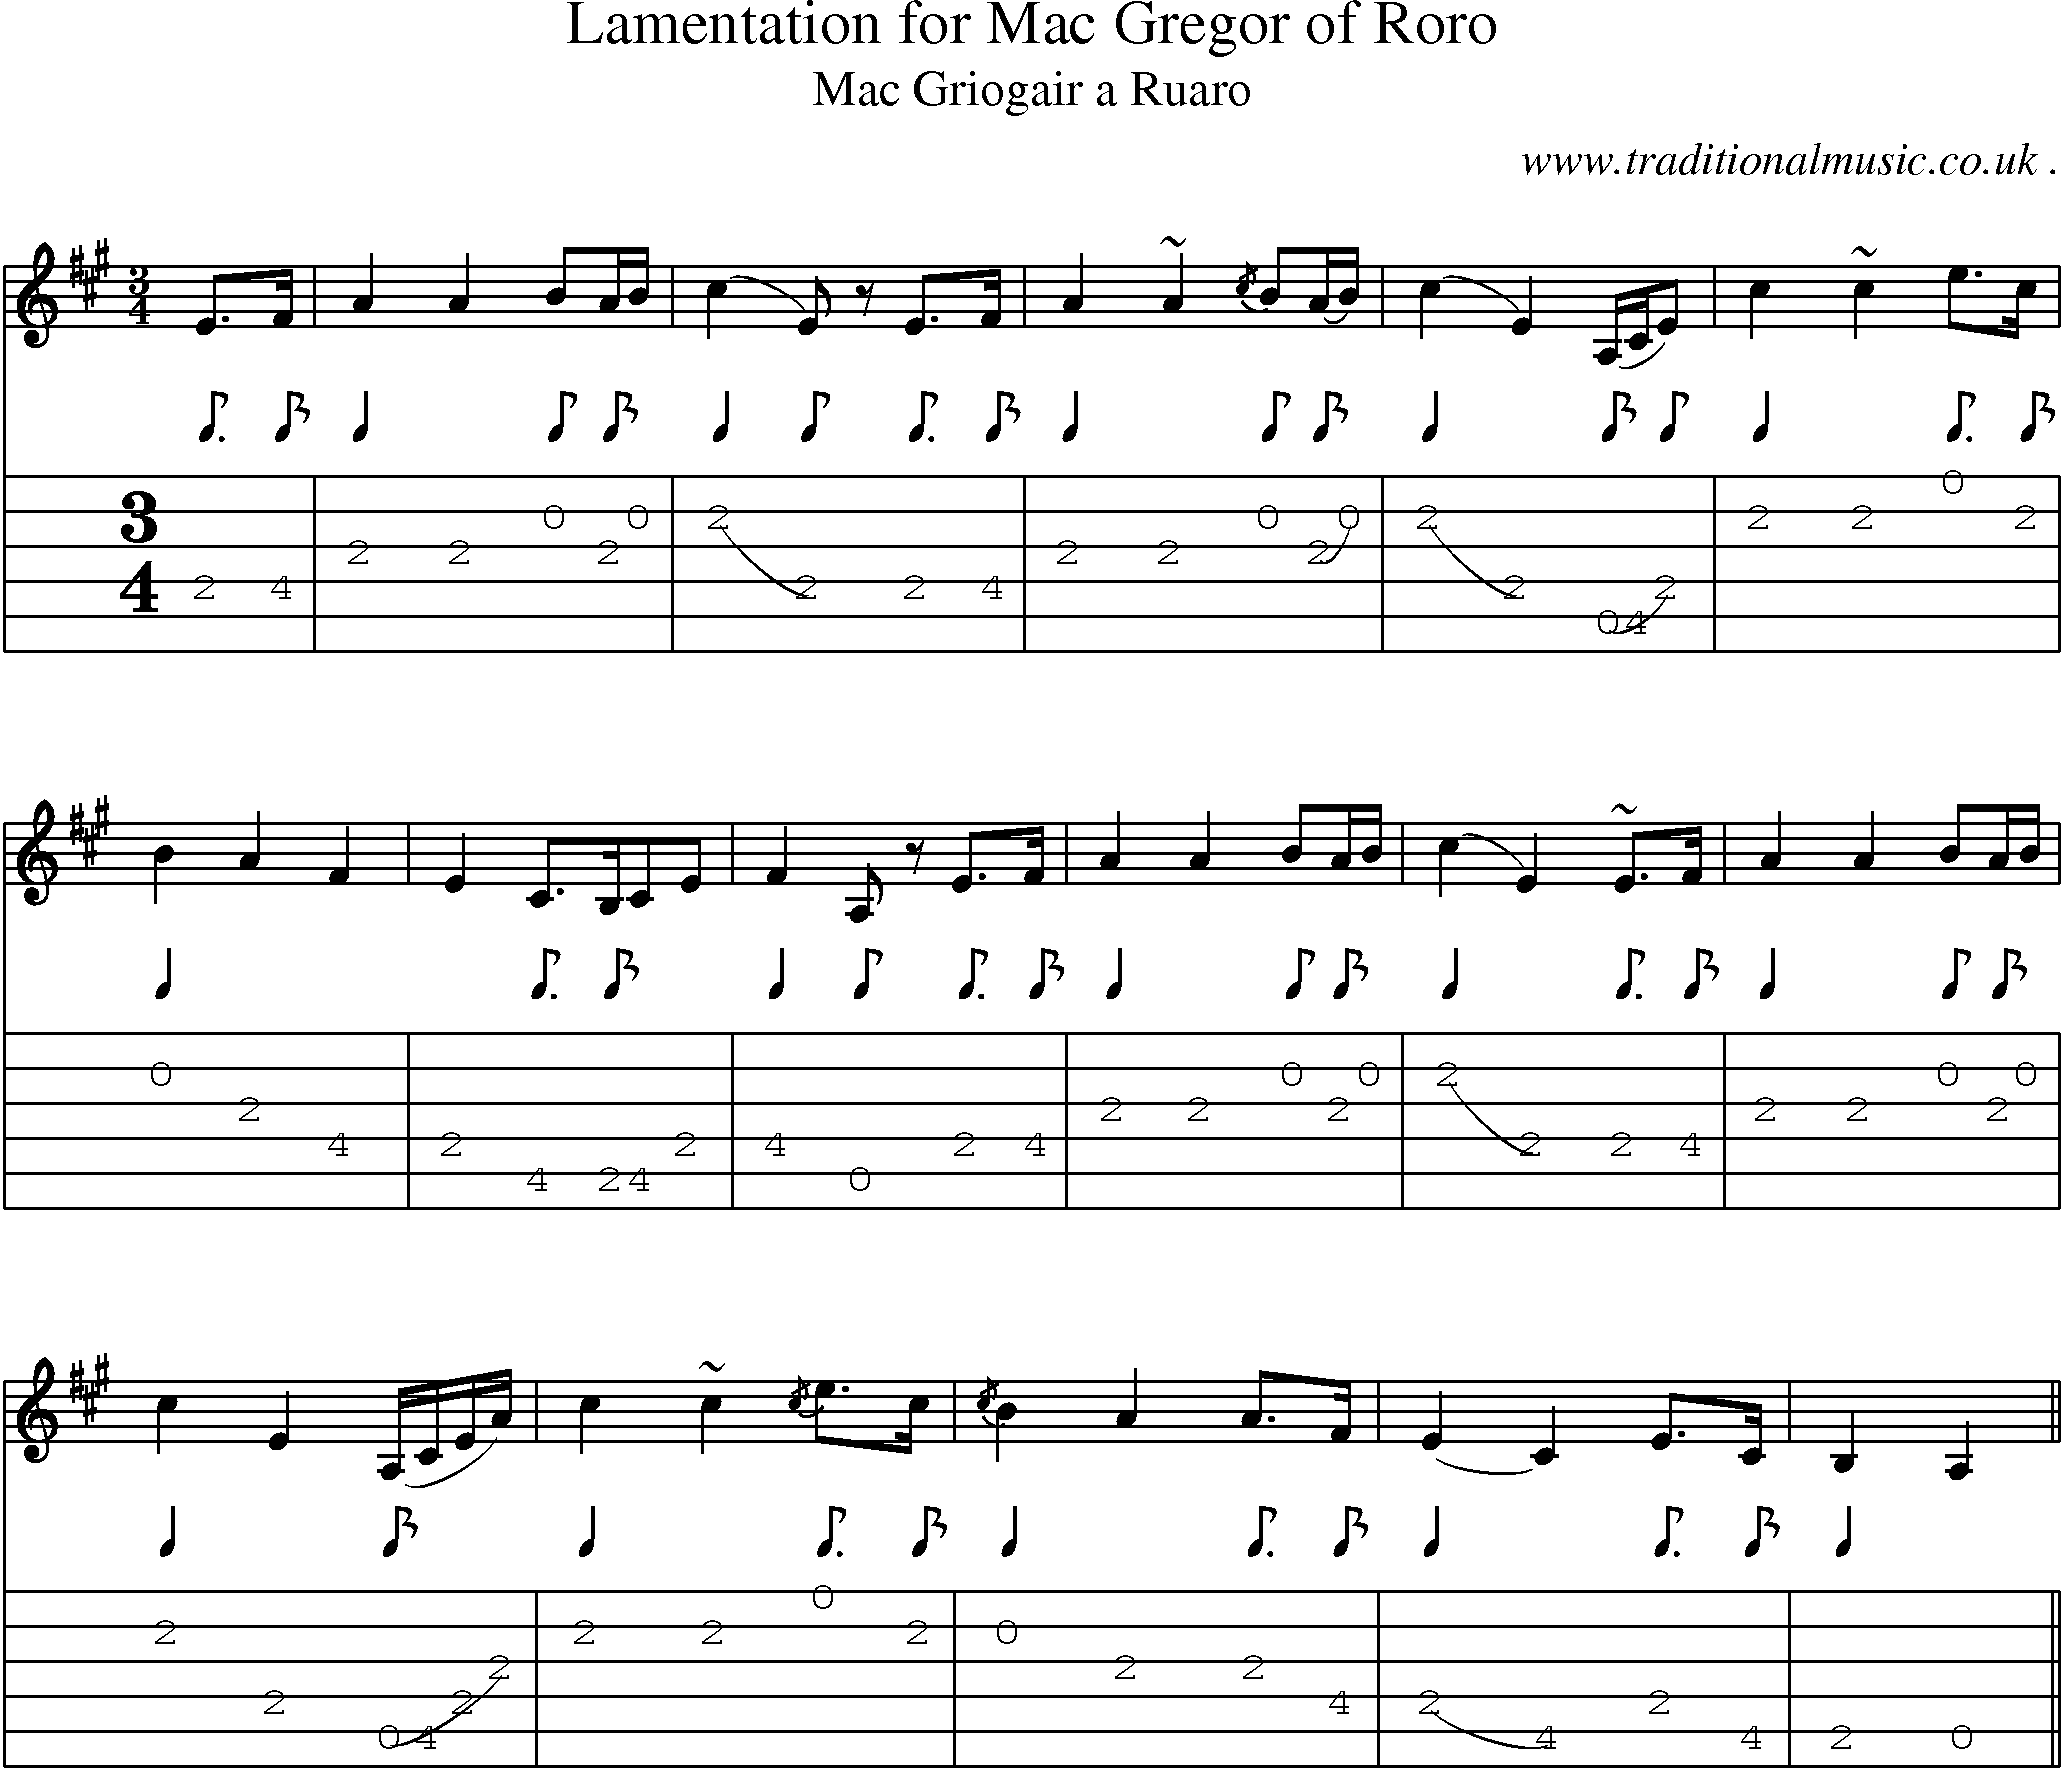 Sheet-music  score, Chords and Guitar Tabs for Lamentation For Mac Gregor Of Roro